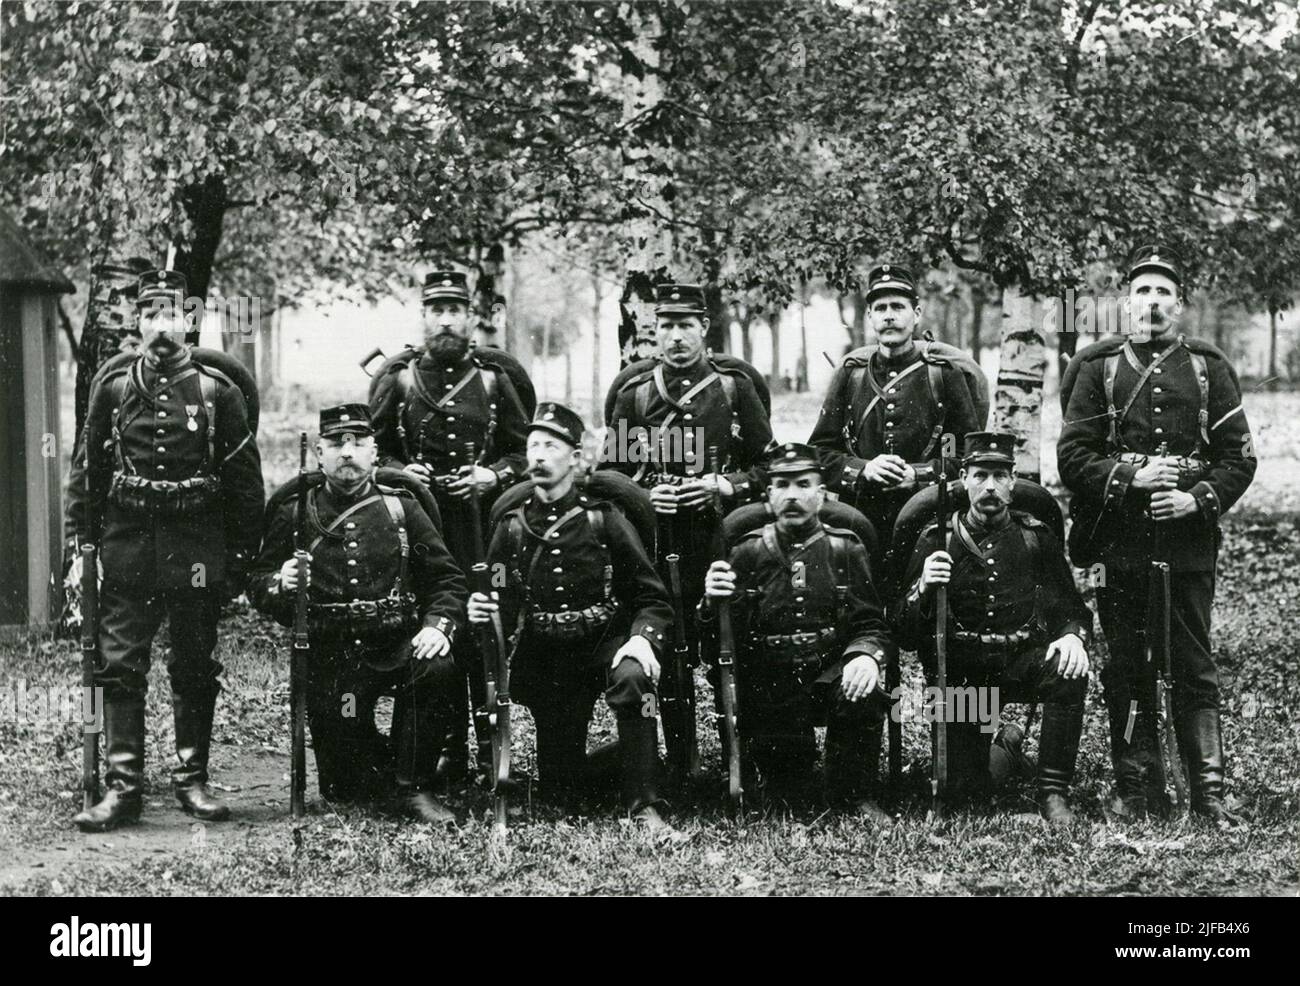 Group portrait of soldiers, possibly from Södermanland's regiment in 10 ...